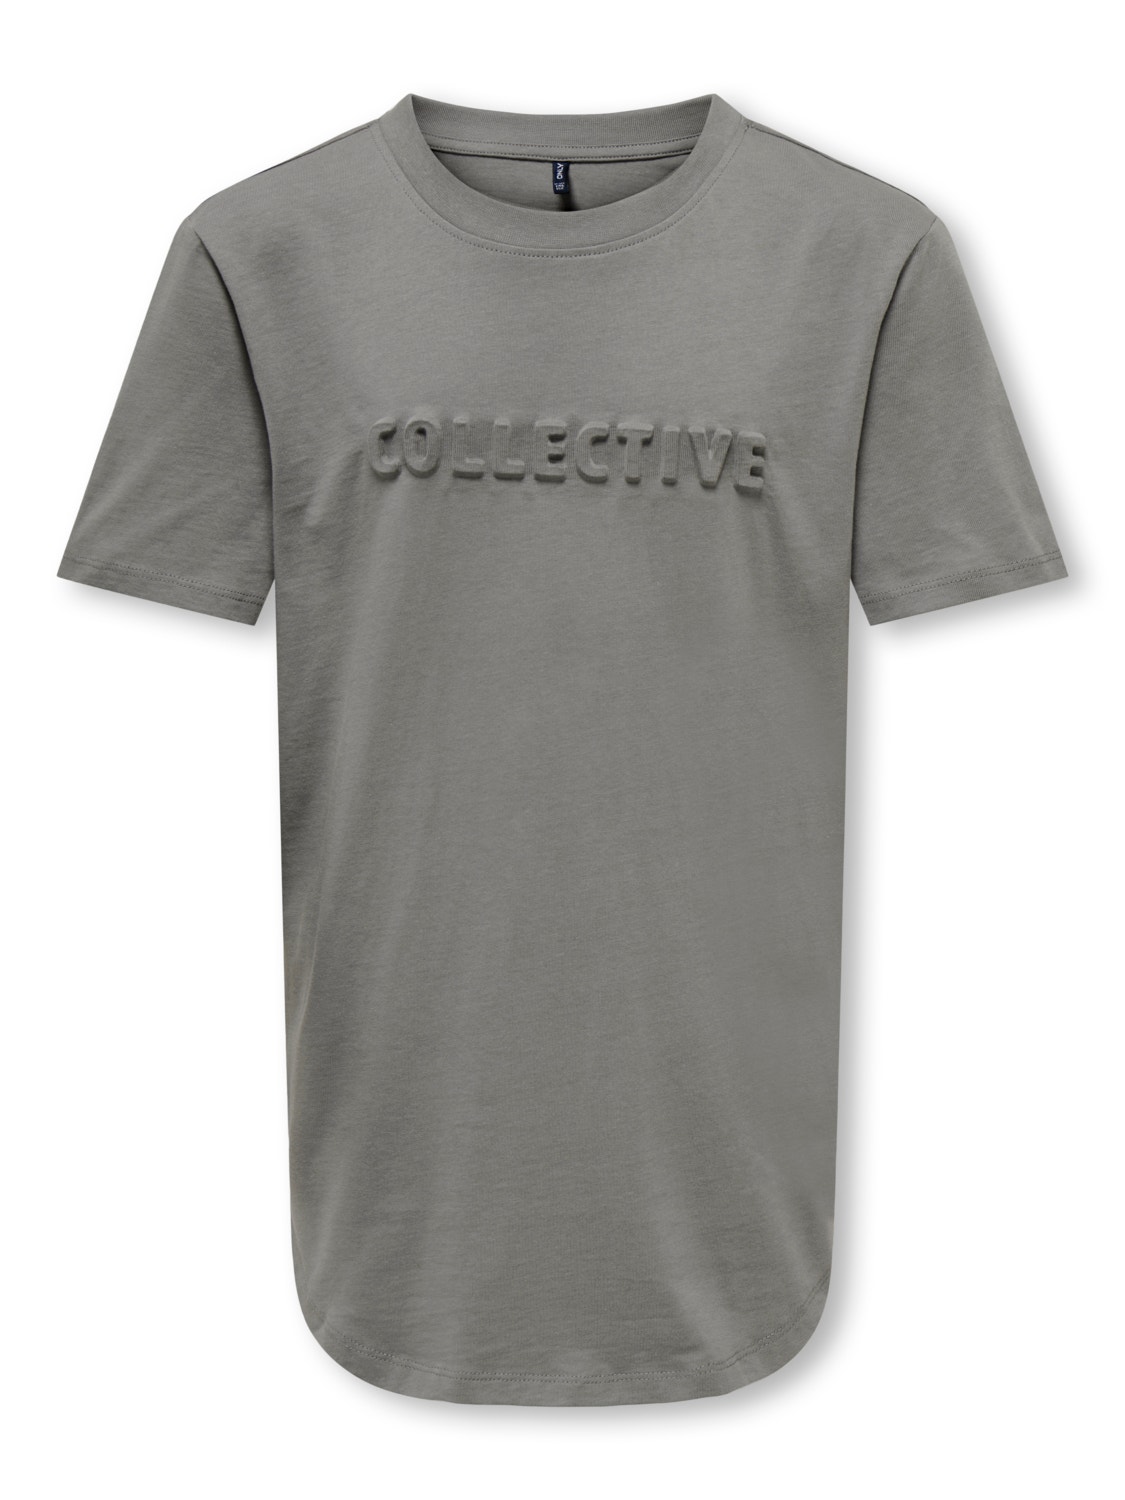 ONLY Regular Fit Round Neck T-Shirt -Steeple Gray - 15303796